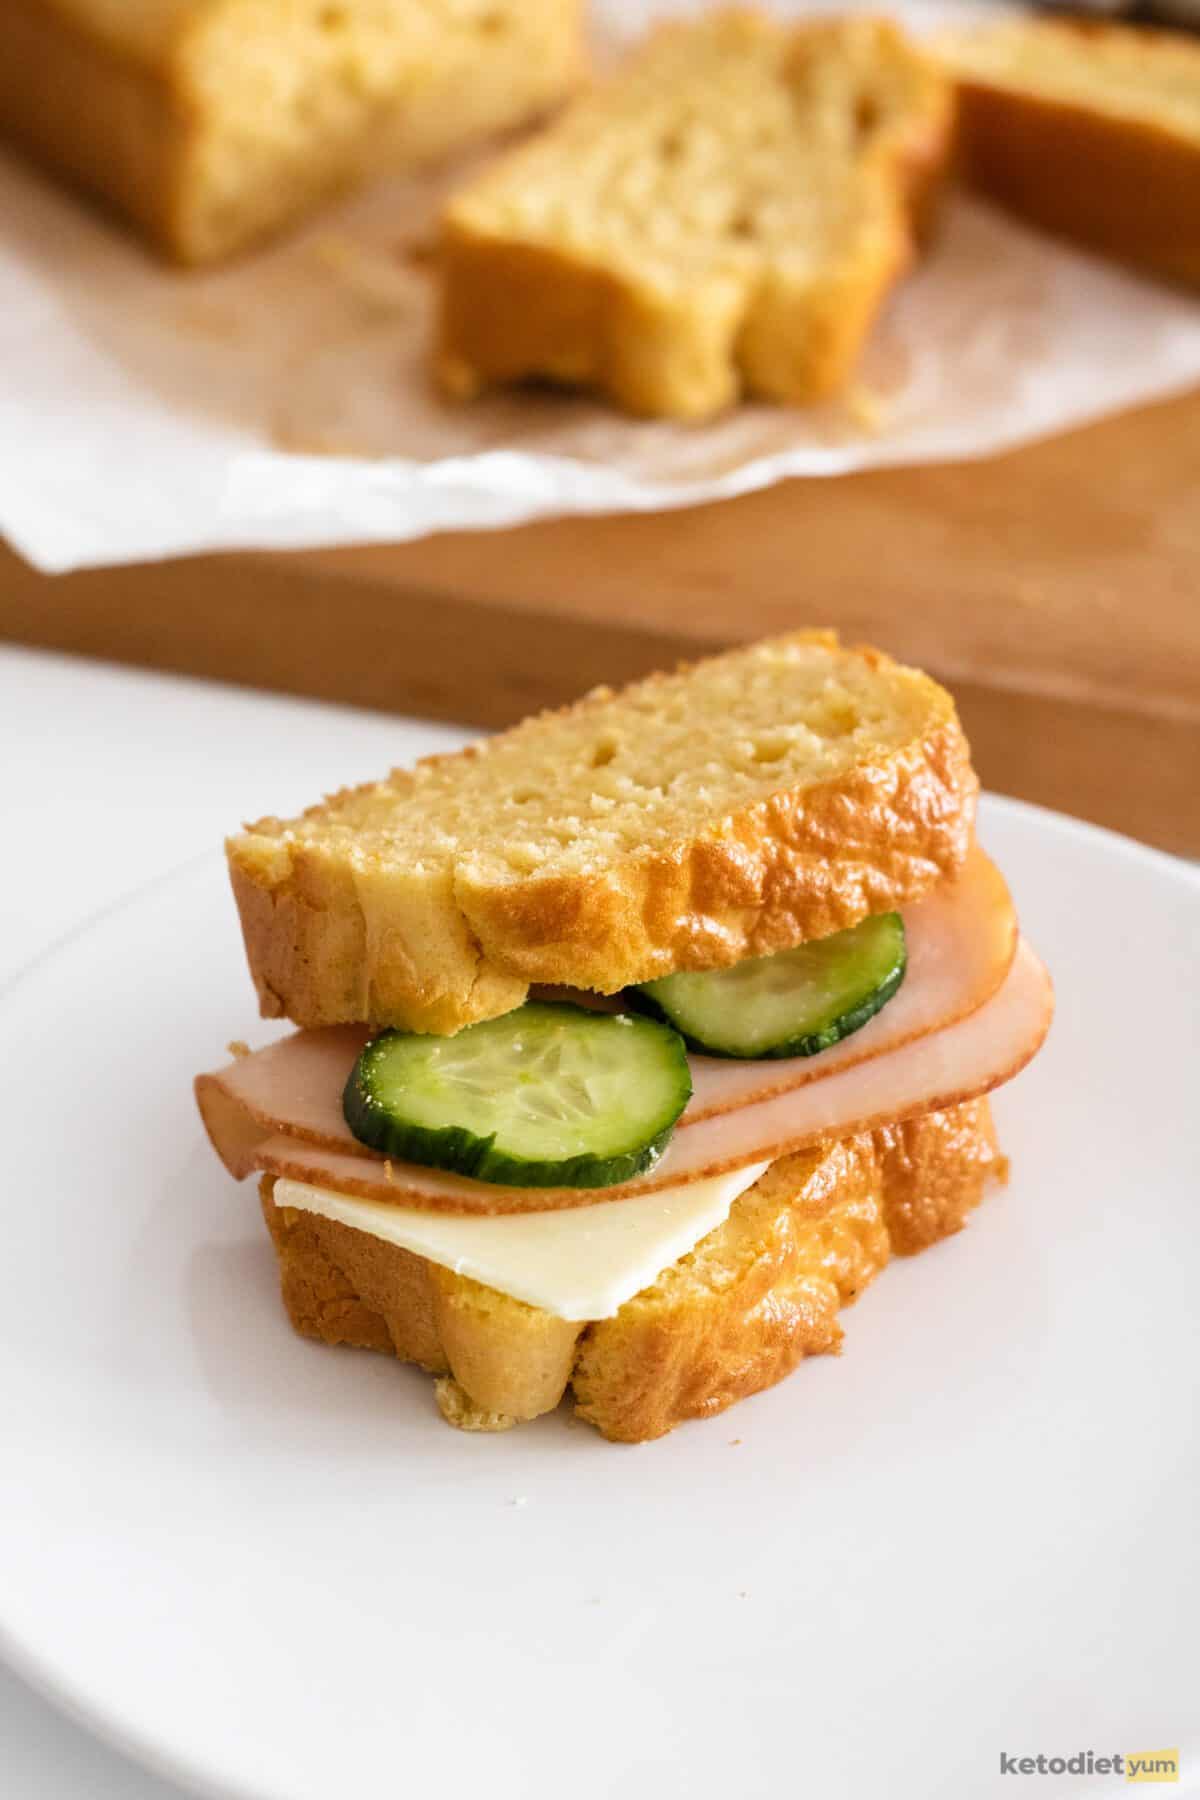 Sandwich with cucumber, ham and cheese on a white plate with a loaf of bread on baking paper in the background